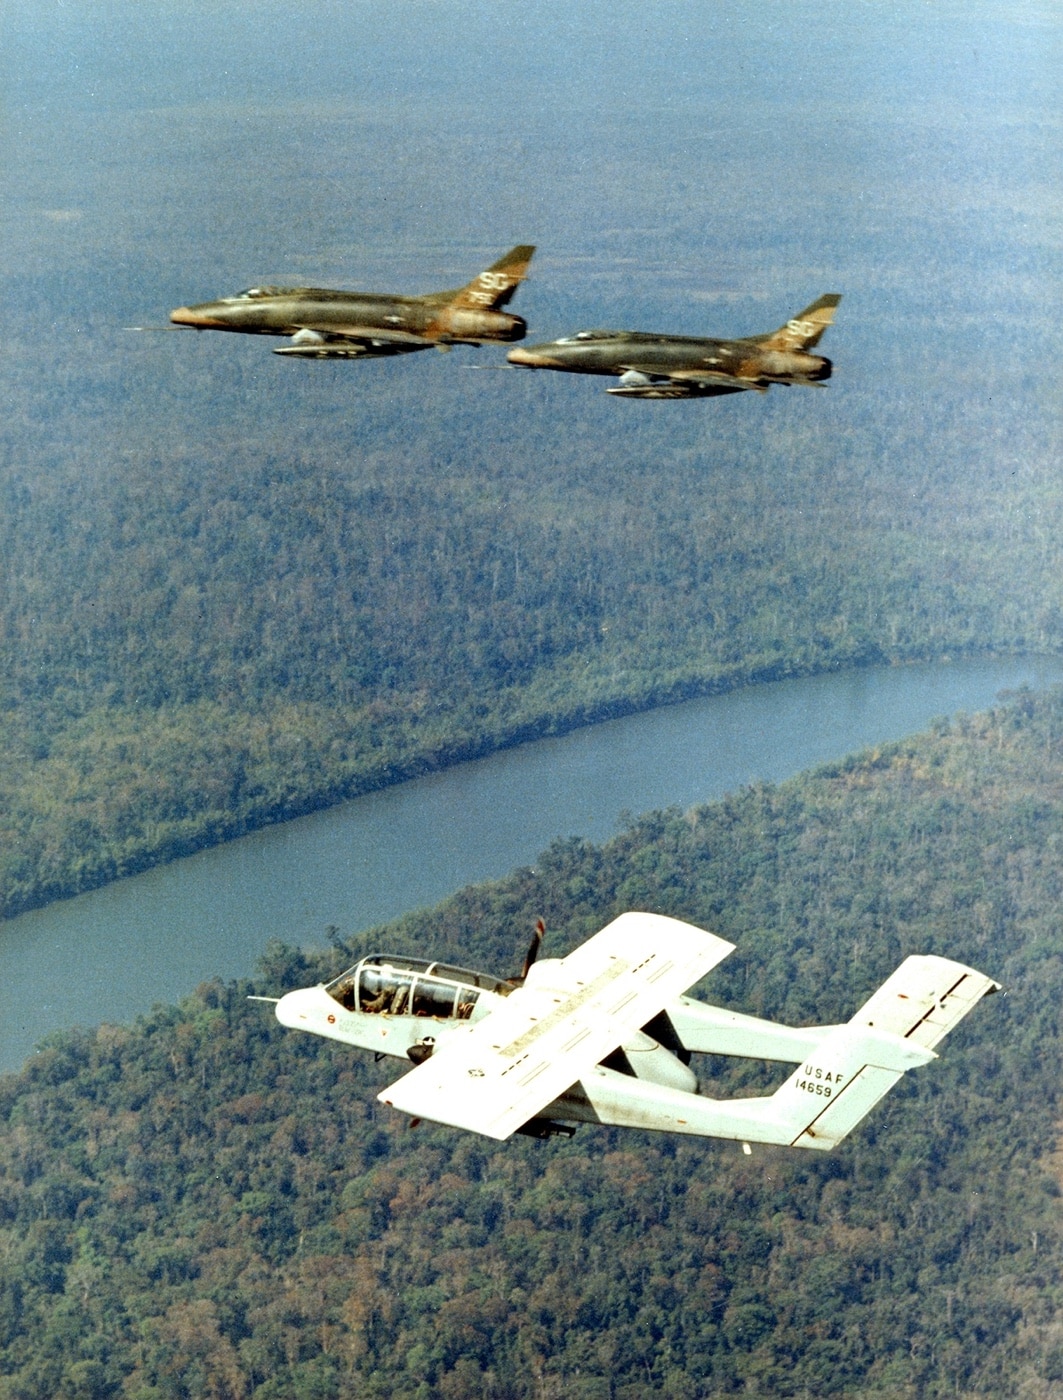 ov-10a bronco and two f-100c super sabres over vietnam